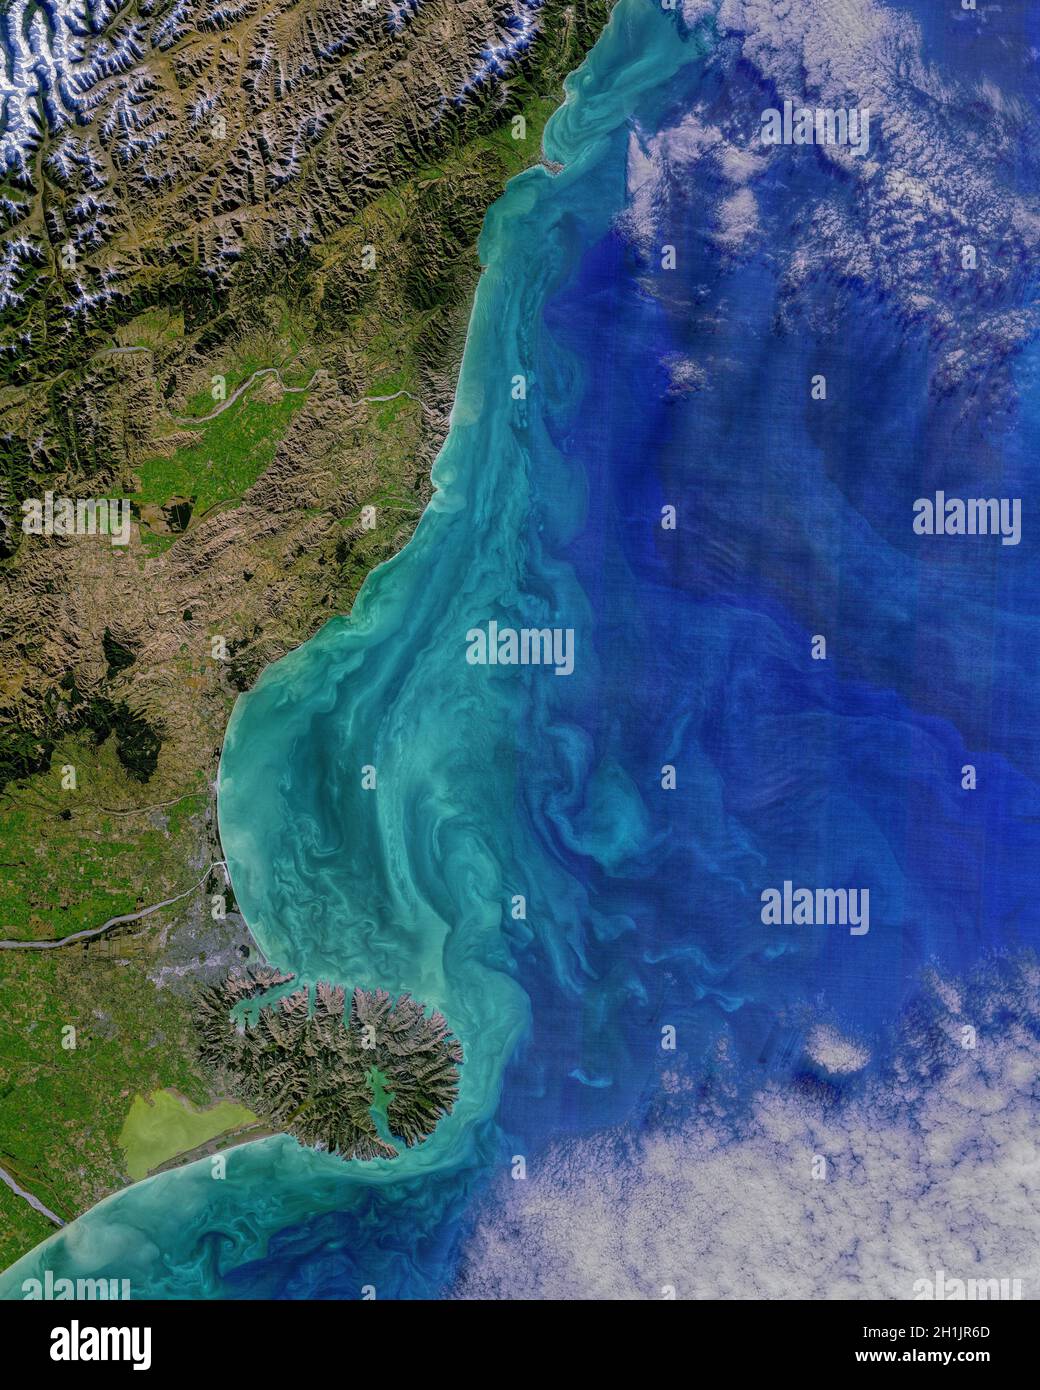 The coastal Canterbury region of the South Island, New Zealand. from Kaikoura Peninsula (north) to Banks Peninsula (south).  image acquired on 19 May 2021, with the Operational Land Imager (OLI) on the Landsat 8 satellite.   An optimised and digitally enhanced version of a NASA image / credit NASA Stock Photo